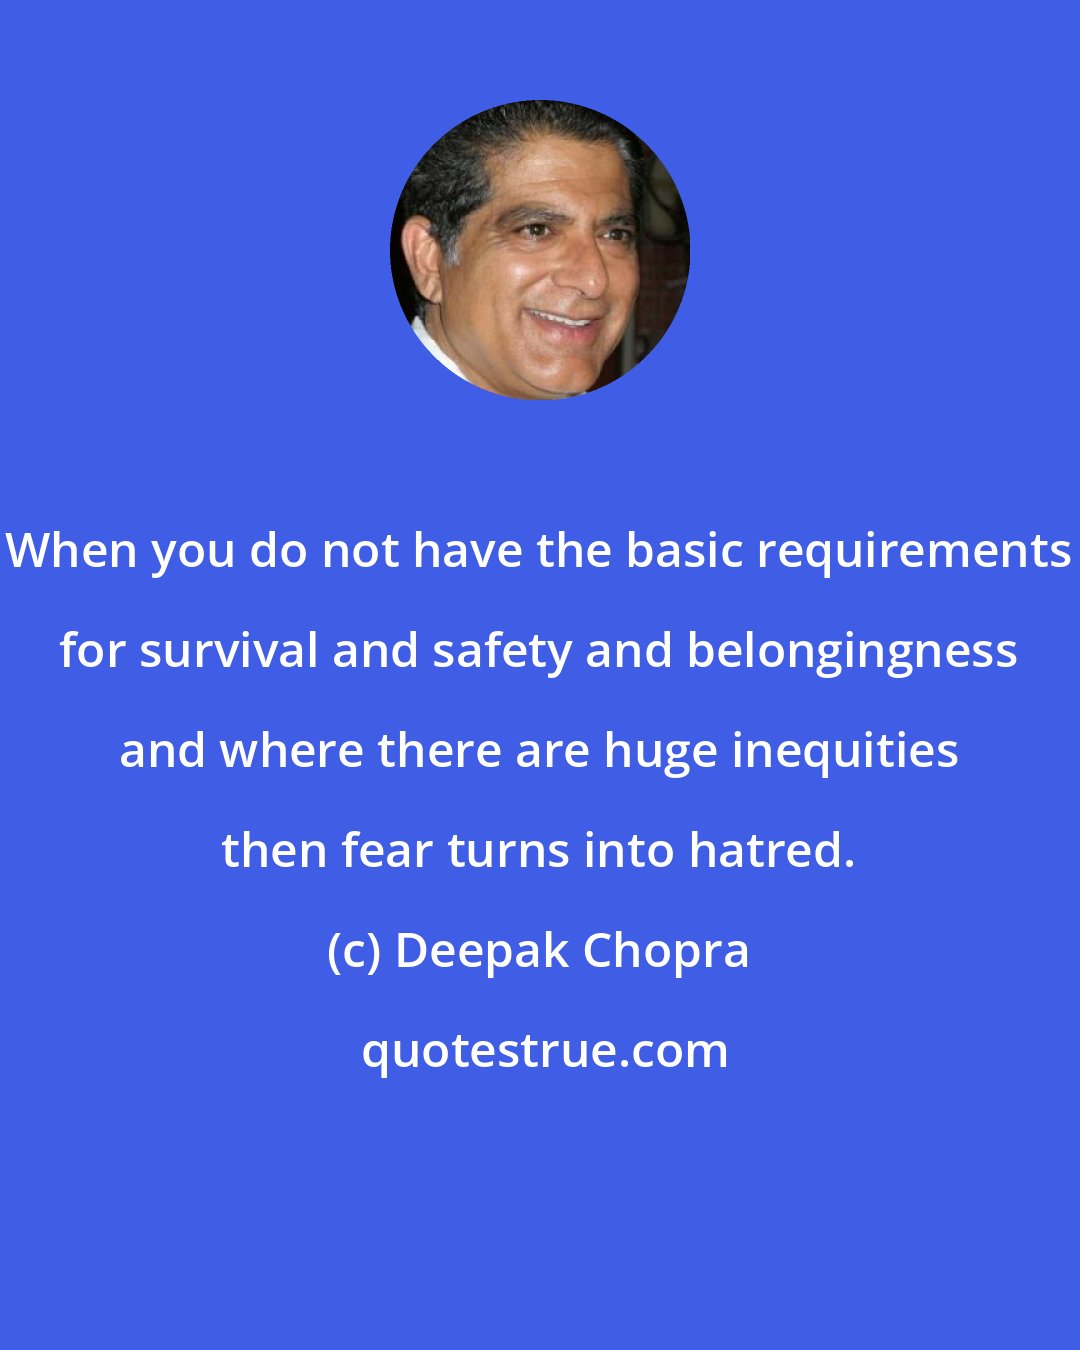 Deepak Chopra: When you do not have the basic requirements for survival and safety and belongingness and where there are huge inequities then fear turns into hatred.